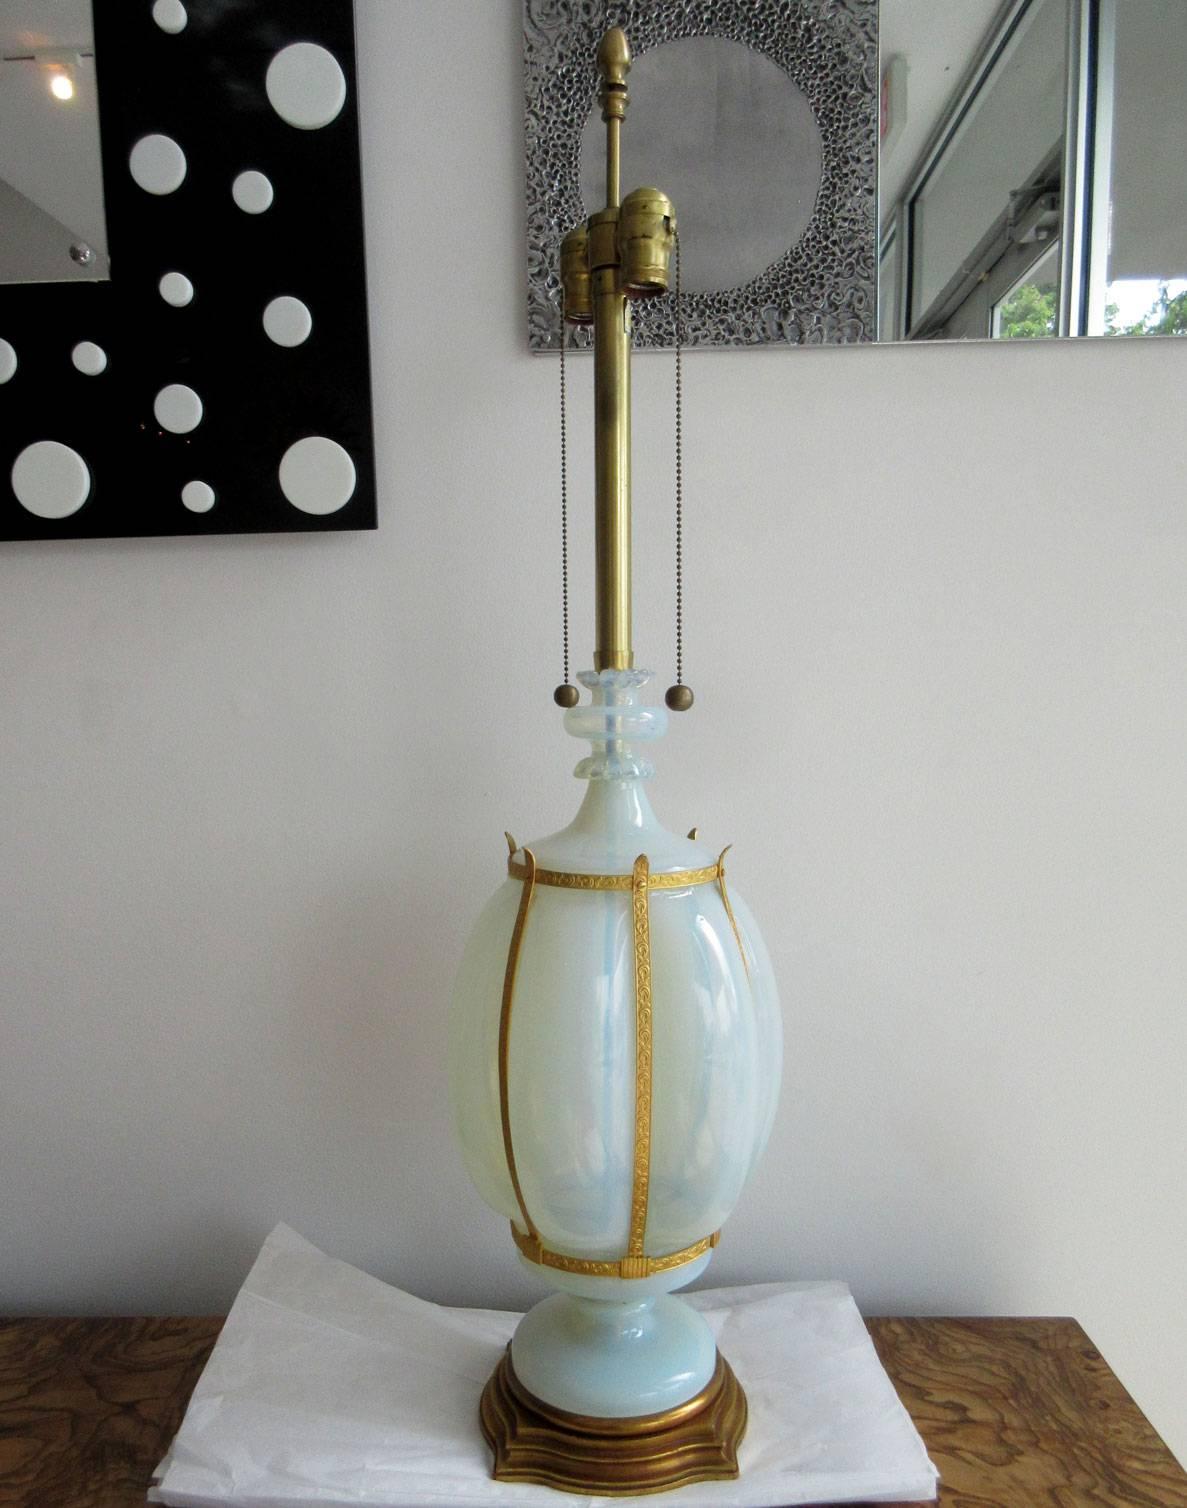 Pair of vintage Barovier handblown Murano glass lamps in an elegantly elongated gourd form with brass accents. The glass is opalescent sky-blue in color. Made for Marbro in the 1950s.

Note: one lamp has extensions on the pull chain that is not